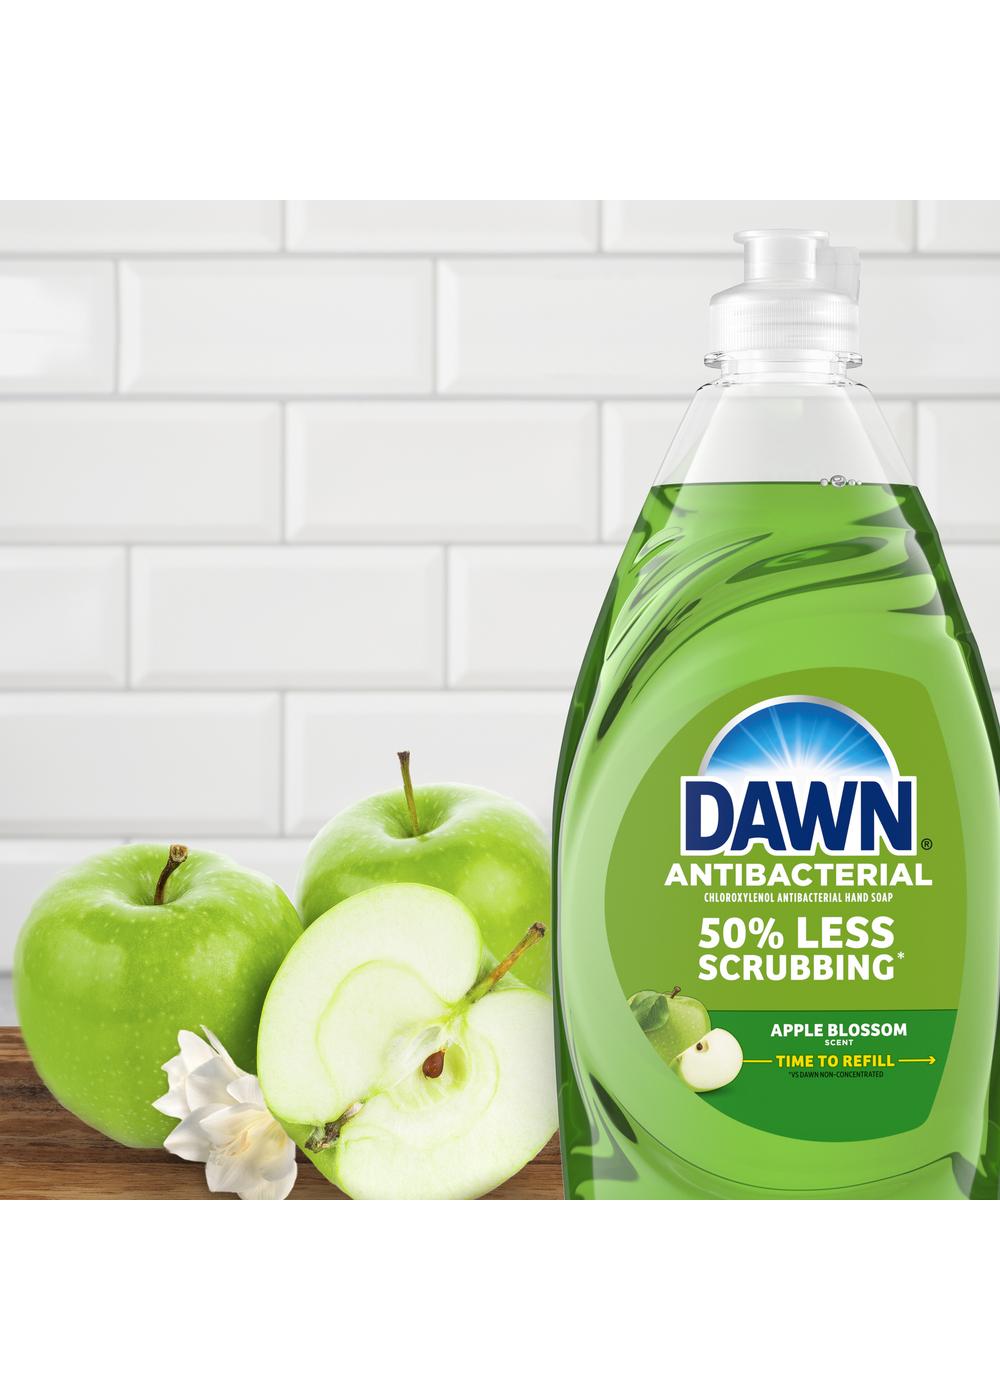 Dawn Ultra Antibacterial Hand Soap - Apple Blossom; image 5 of 8